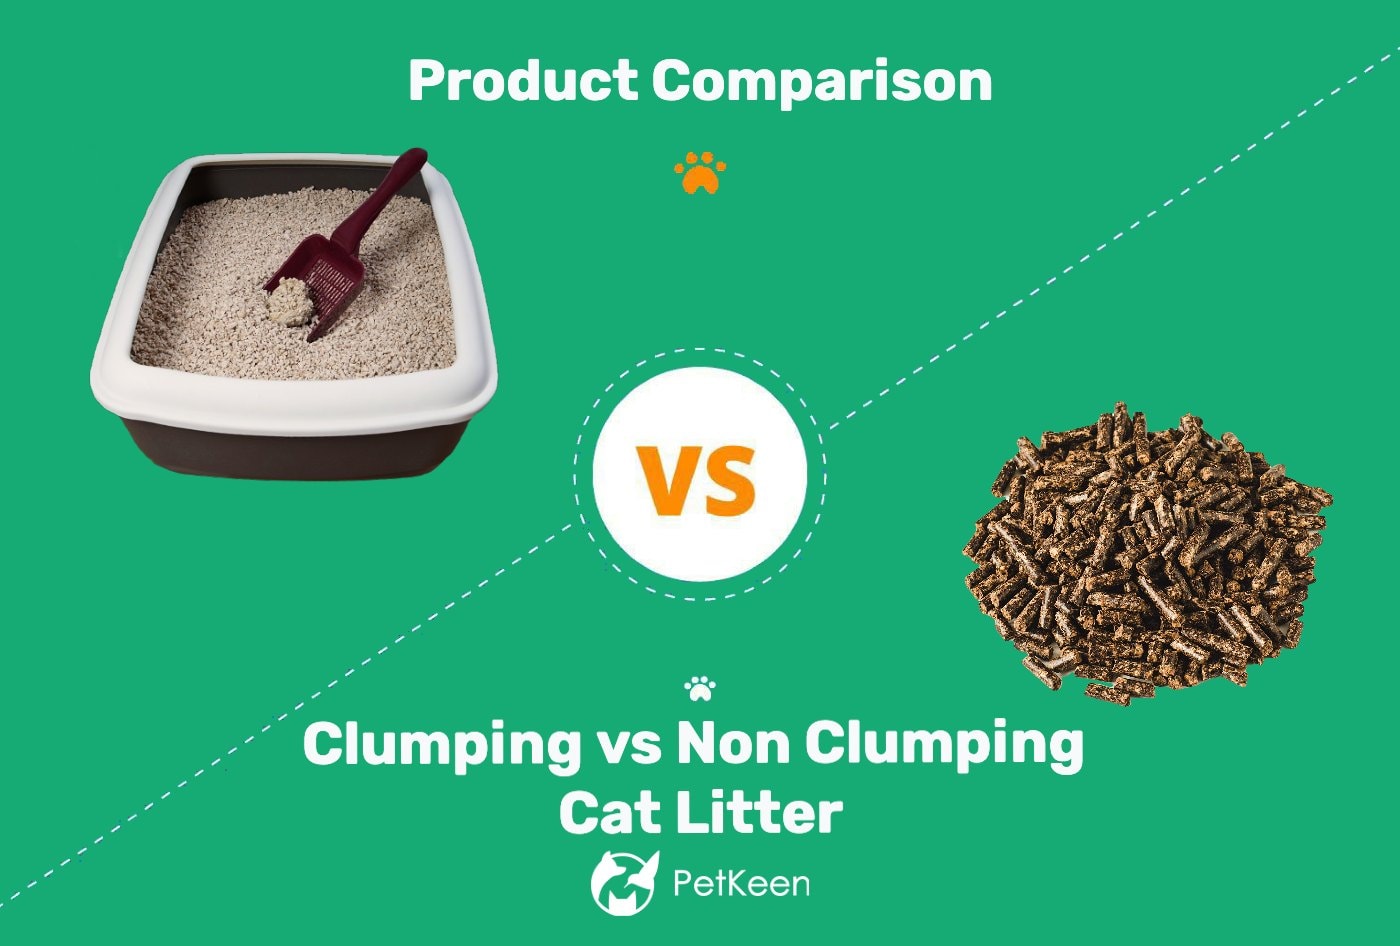 How Does Clumping Cat Litter Work?